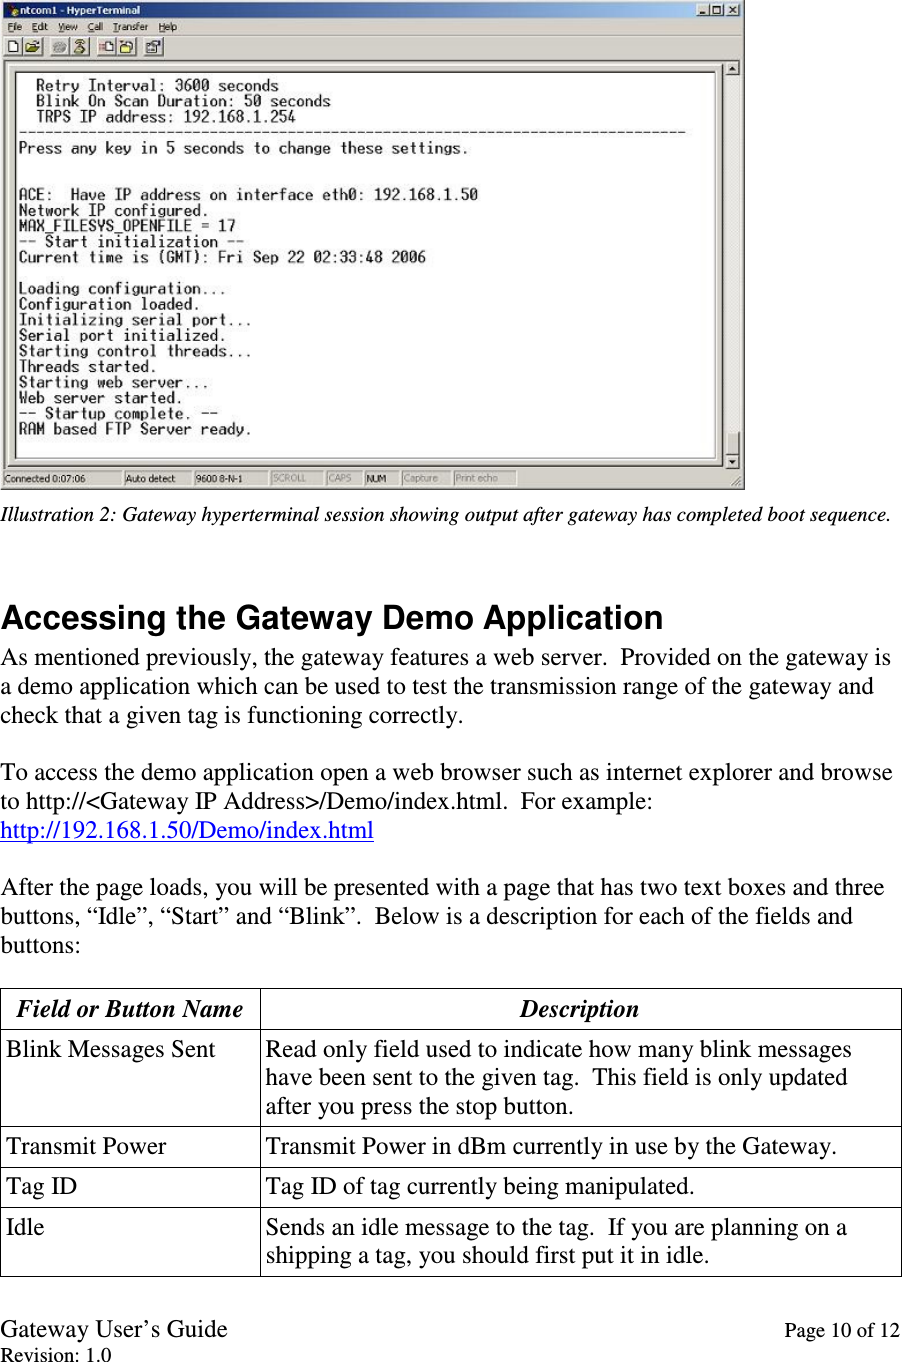 Gateway User’s Guide    Page 10 of 12 Revision: 1.0    Accessing the Gateway Demo Application As mentioned previously, the gateway features a web server.  Provided on the gateway is a demo application which can be used to test the transmission range of the gateway and check that a given tag is functioning correctly.  To access the demo application open a web browser such as internet explorer and browse to http://&lt;Gateway IP Address&gt;/Demo/index.html.  For example: http://192.168.1.50/Demo/index.html  After the page loads, you will be presented with a page that has two text boxes and three buttons, “Idle”, “Start” and “Blink”.  Below is a description for each of the fields and buttons:  Field or Button Name  Description Blink Messages Sent  Read only field used to indicate how many blink messages have been sent to the given tag.  This field is only updated after you press the stop button. Transmit Power  Transmit Power in dBm currently in use by the Gateway. Tag ID  Tag ID of tag currently being manipulated. Idle  Sends an idle message to the tag.  If you are planning on a shipping a tag, you should first put it in idle.  Illustration 2: Gateway hyperterminal session showing output after gateway has completed boot sequence. 